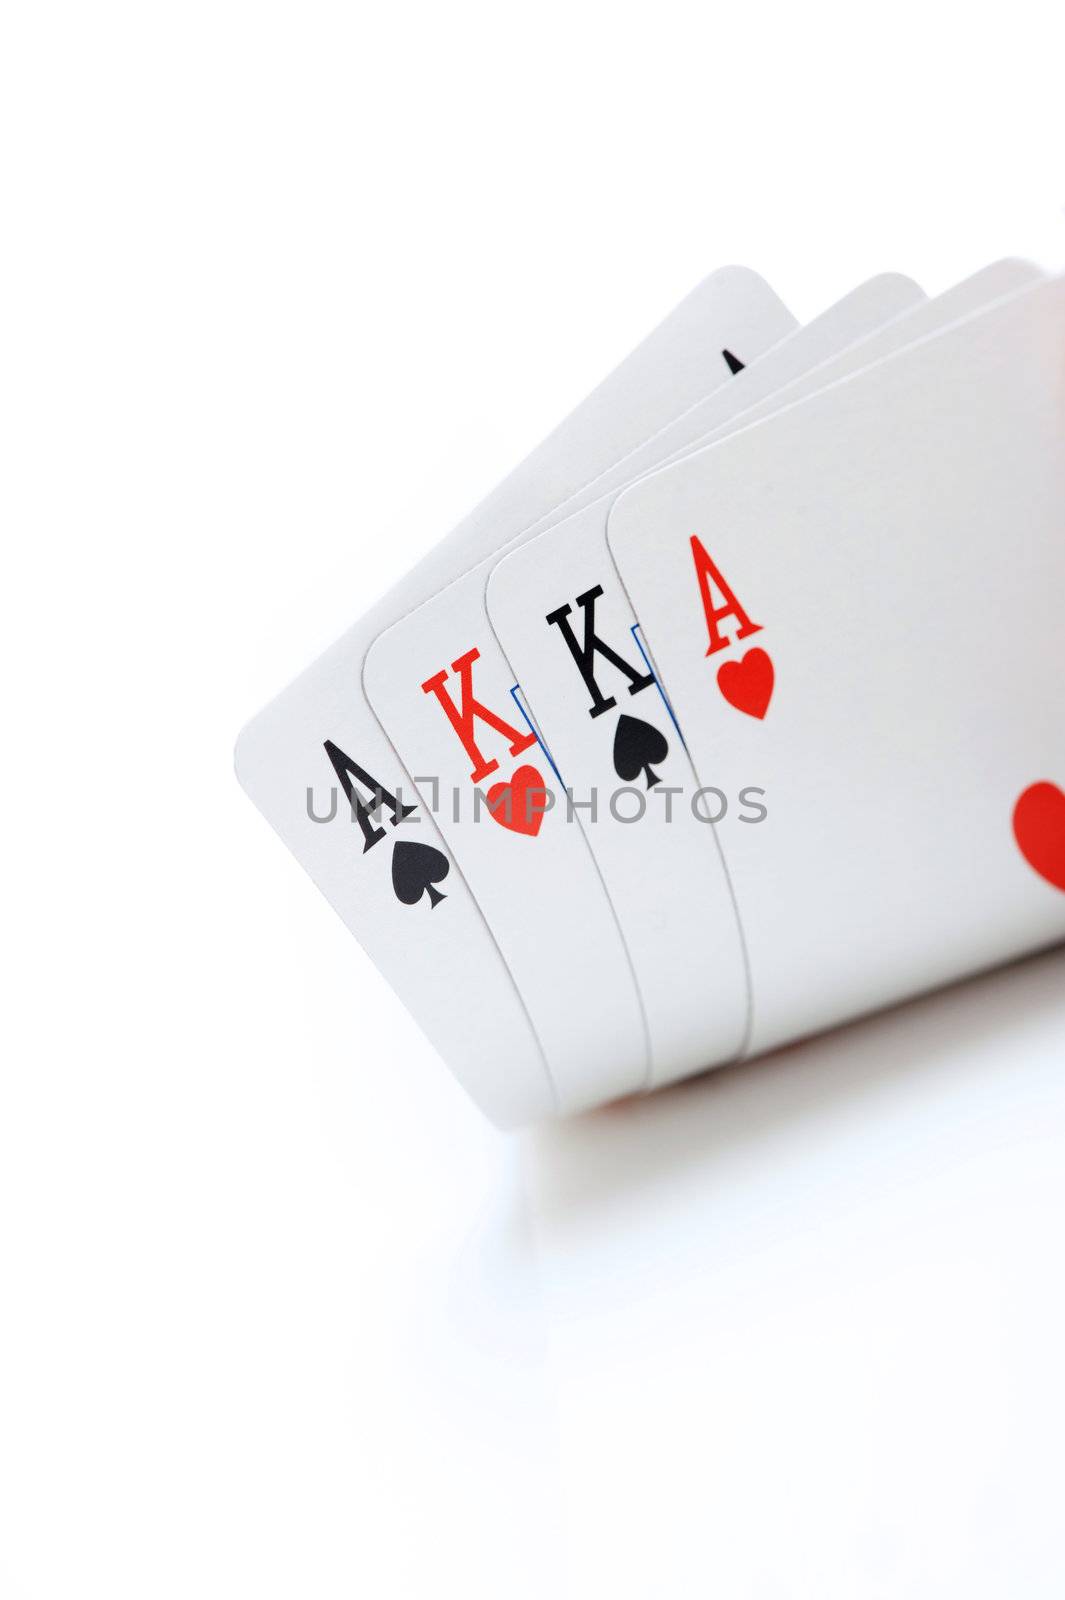 winning omaha starting hand, aces and kings by stokkete